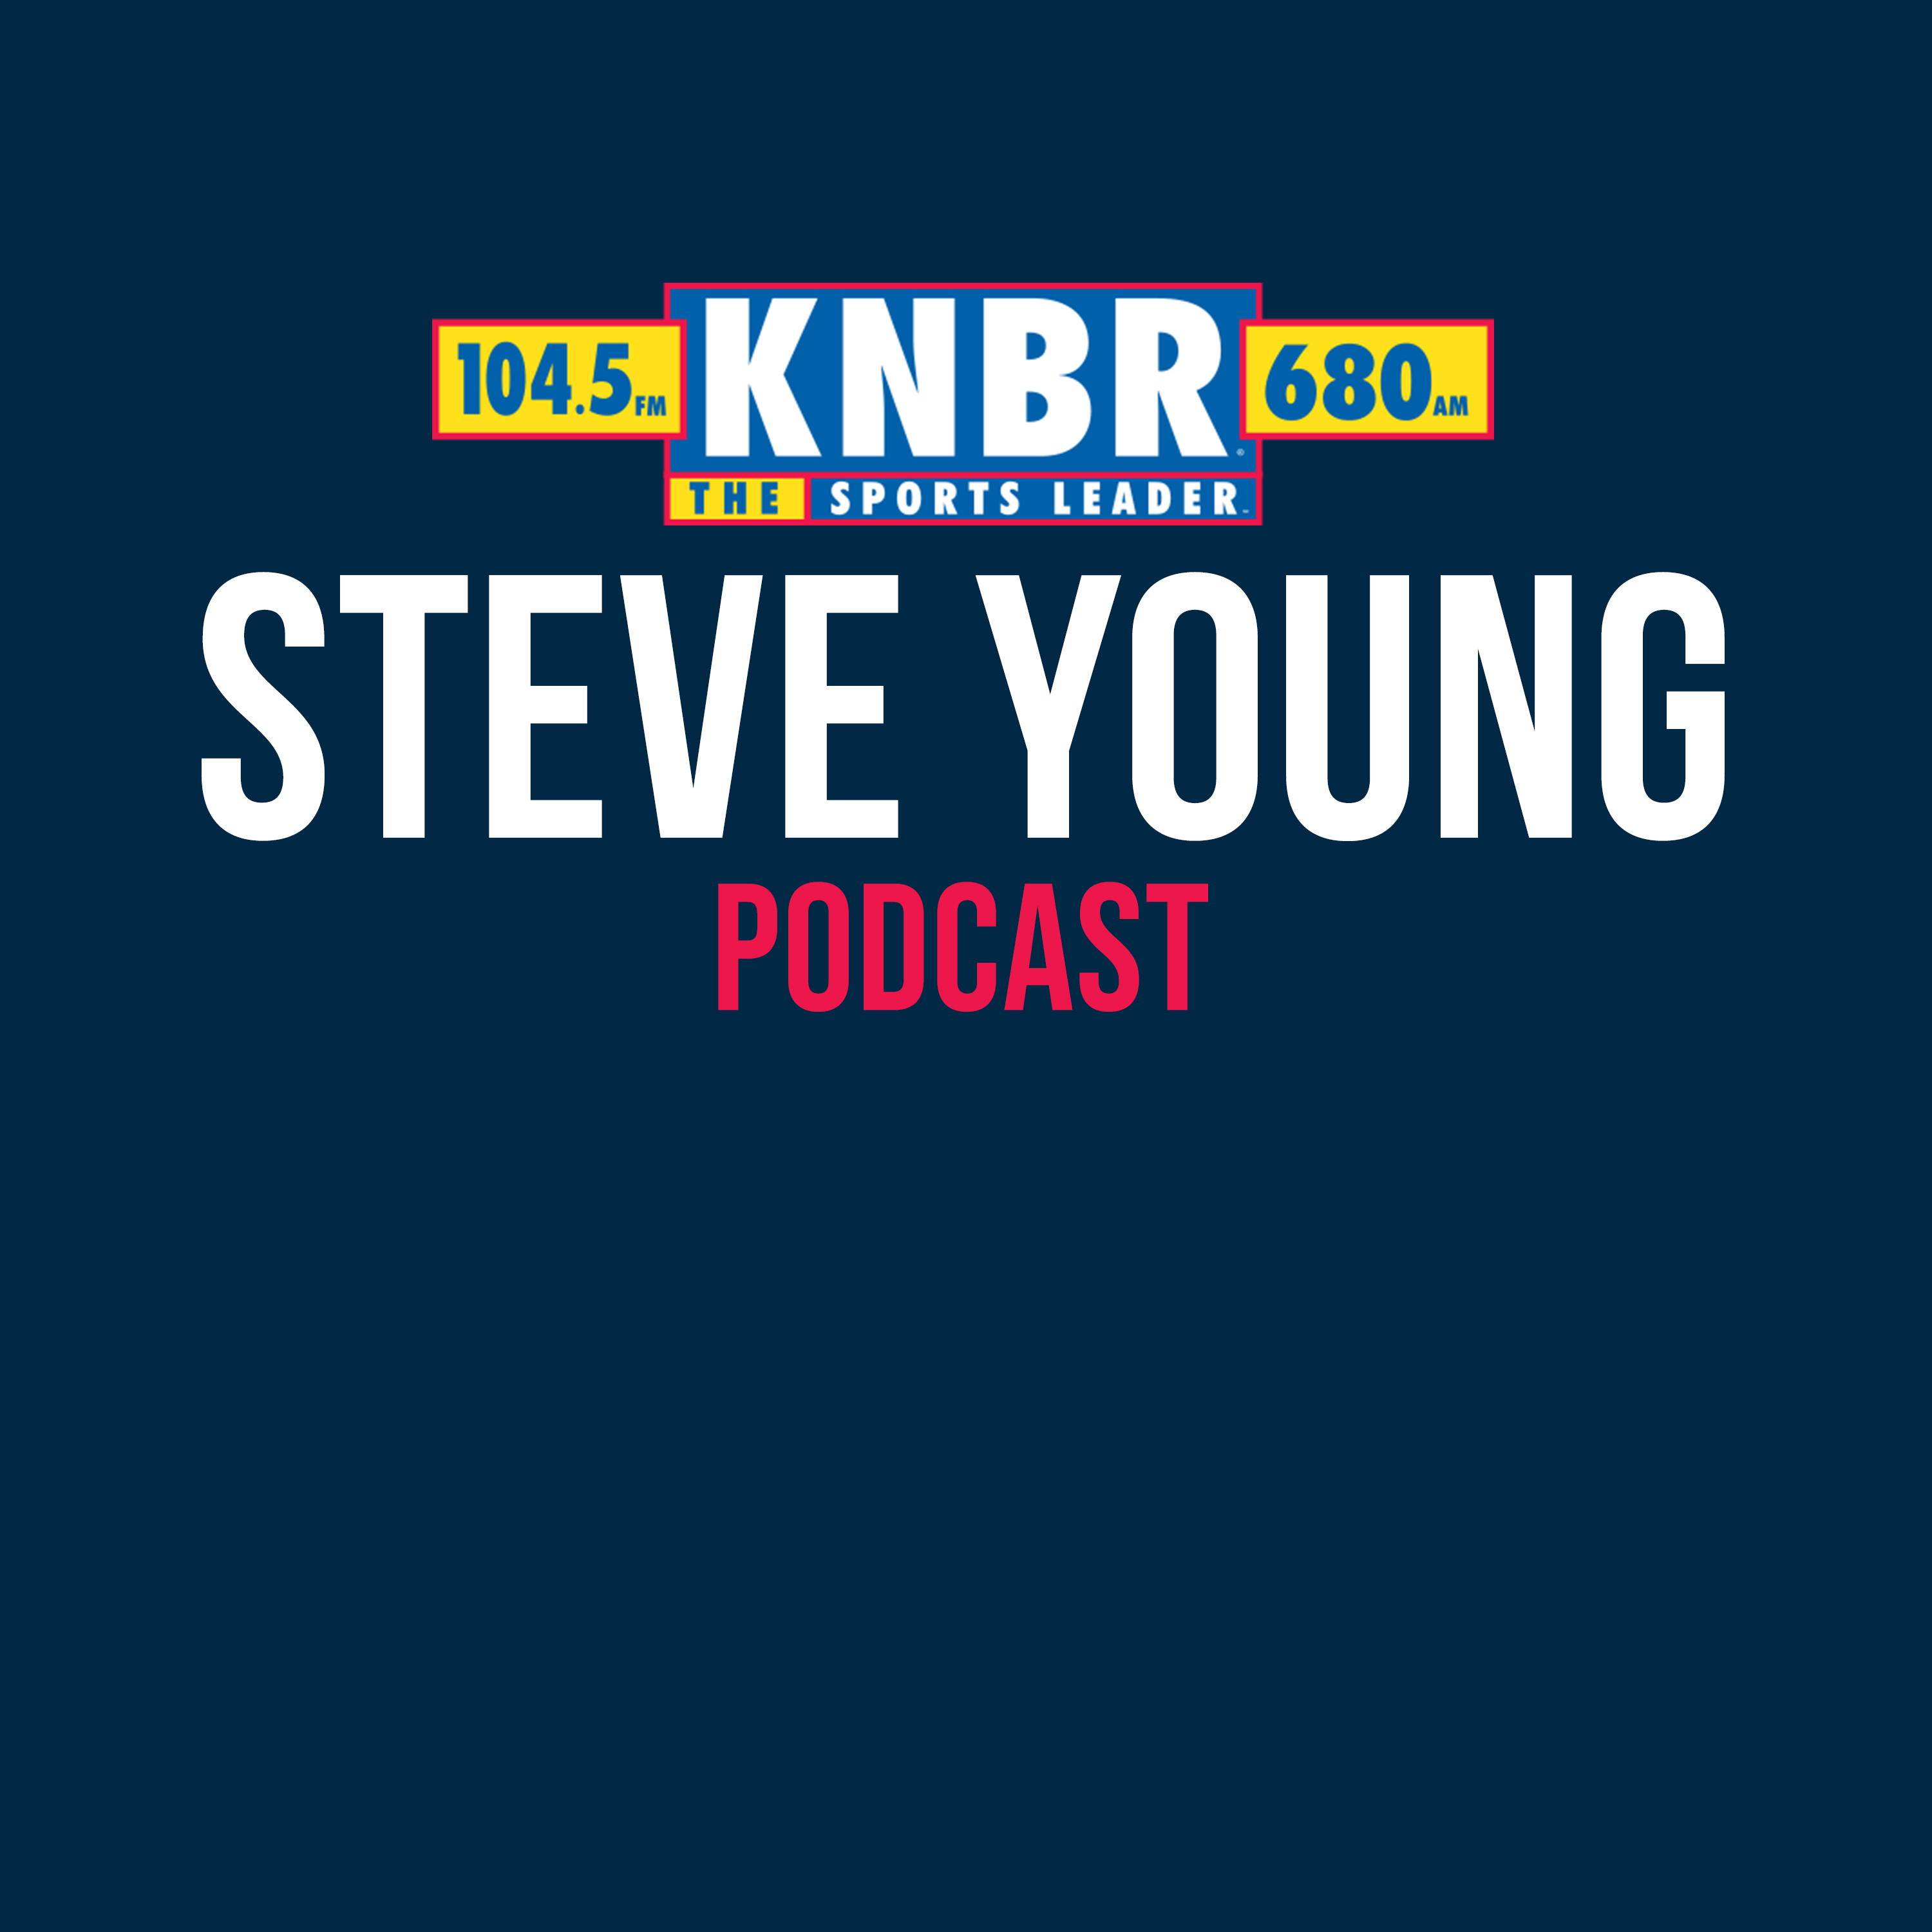 12-13 Steve Young joins Tolbert & Copes to discuss the 49ers win over Seattle & reacts to Draymond Green's indefinite suspension